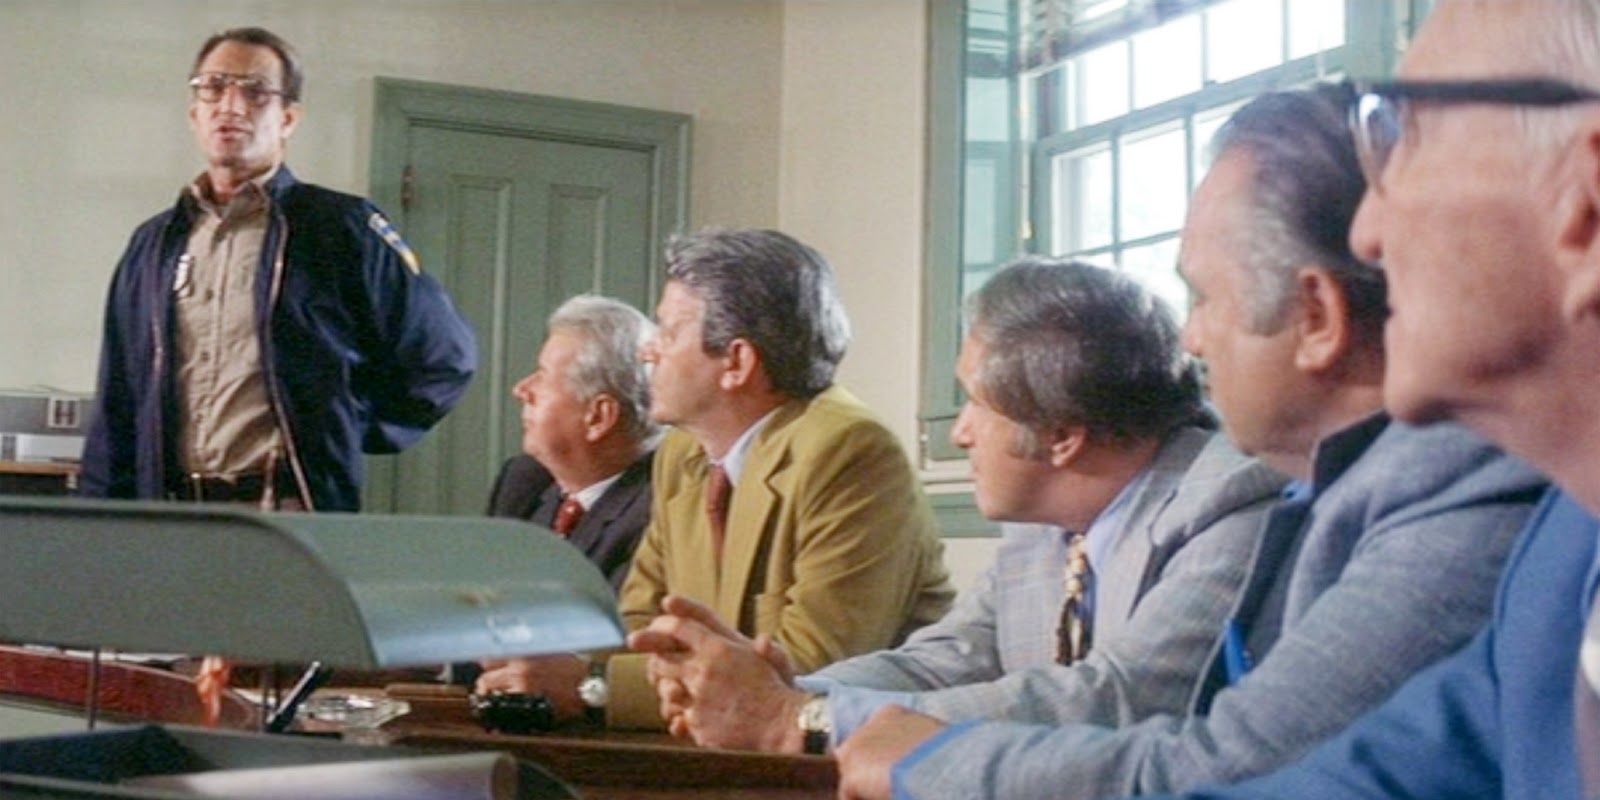 Brody speaks at the town hall in Jaws